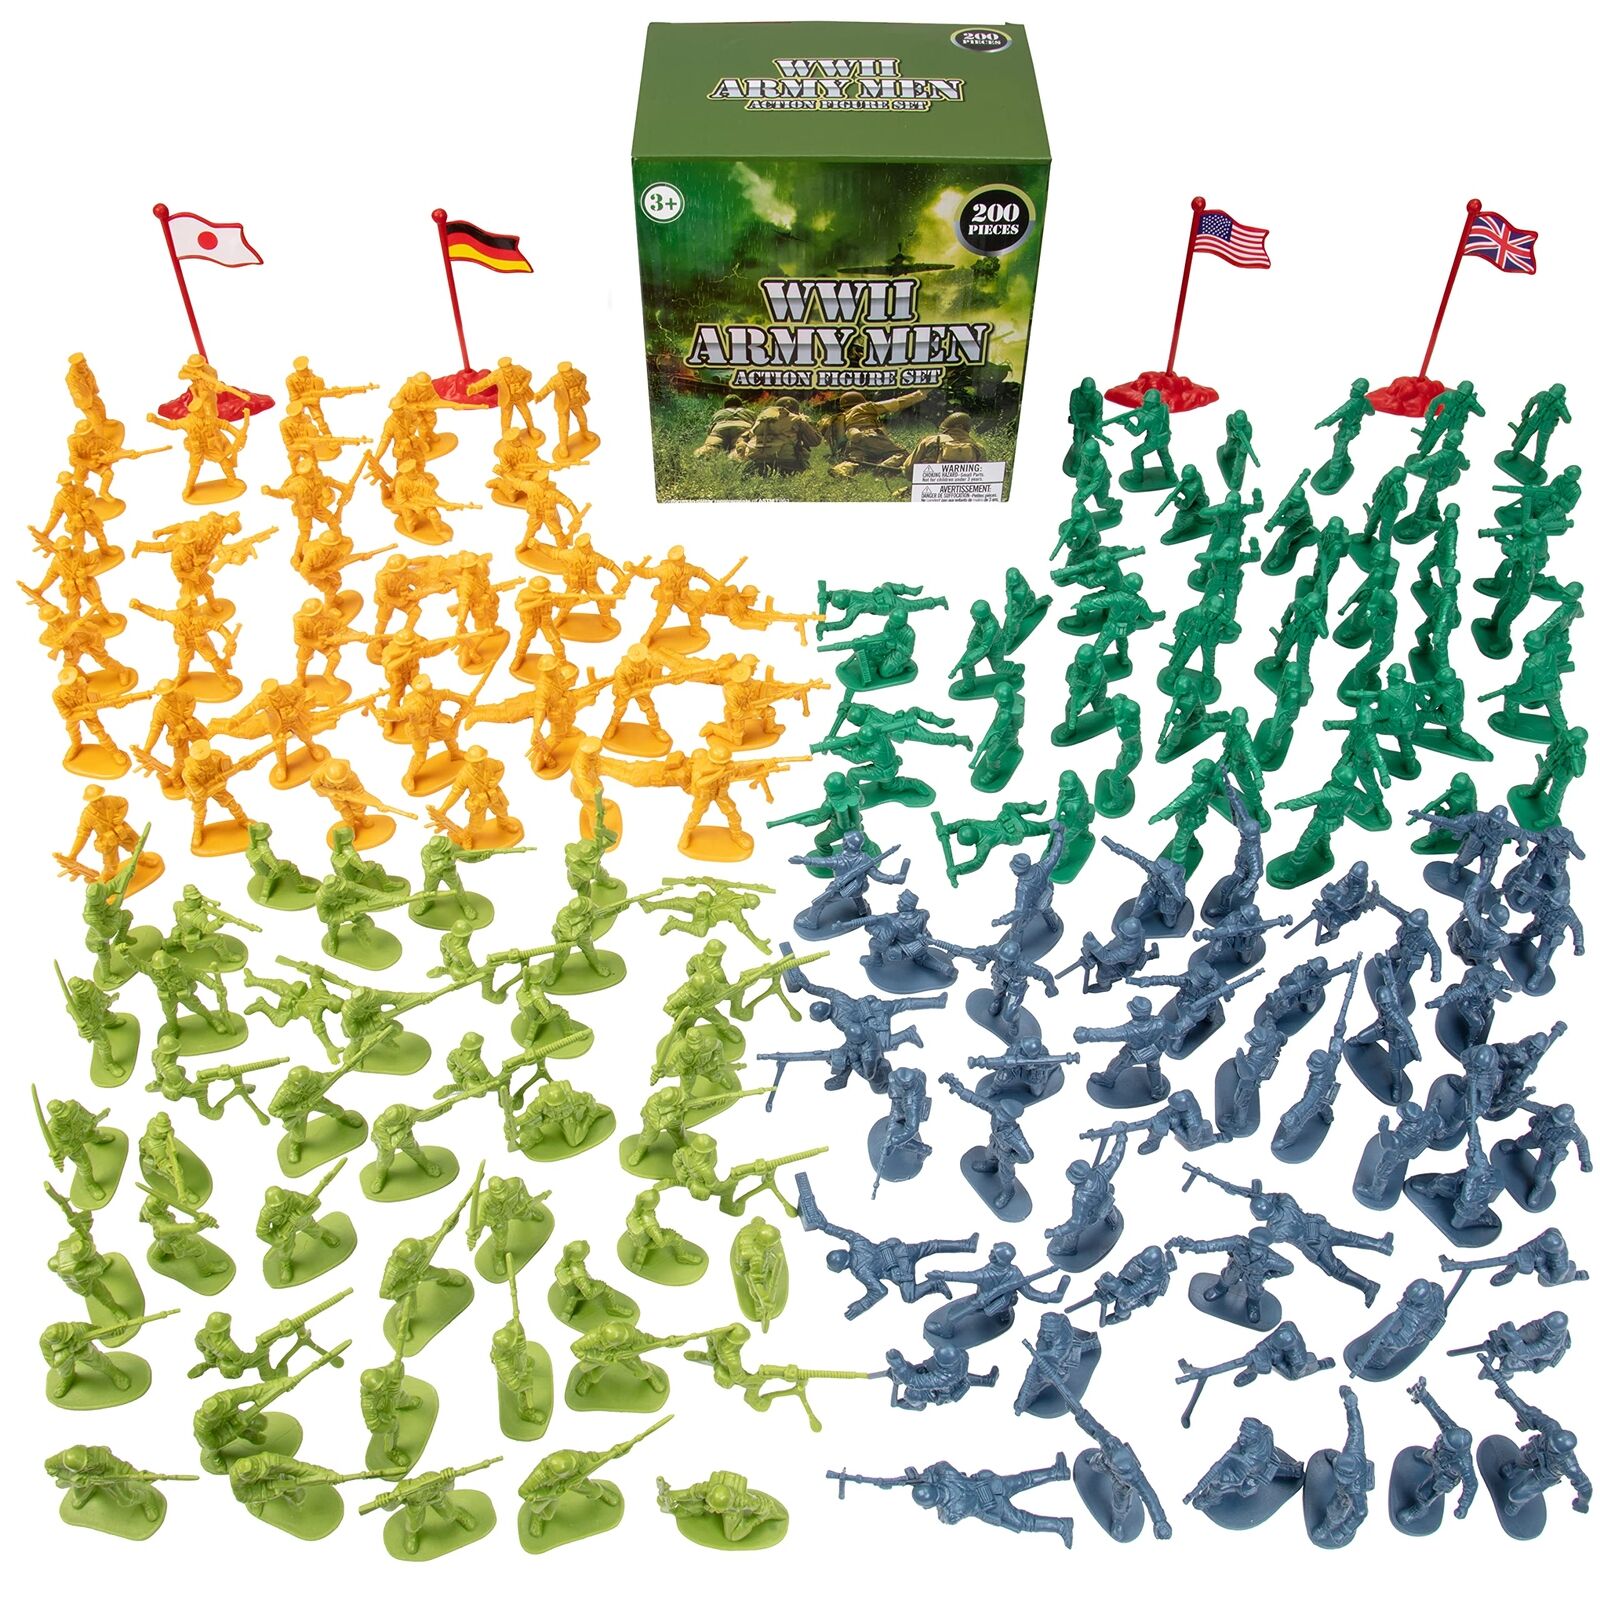 SCS DIRECT 200 -piece set of Army soldiers Big Bucket Army Meme Action Figure so